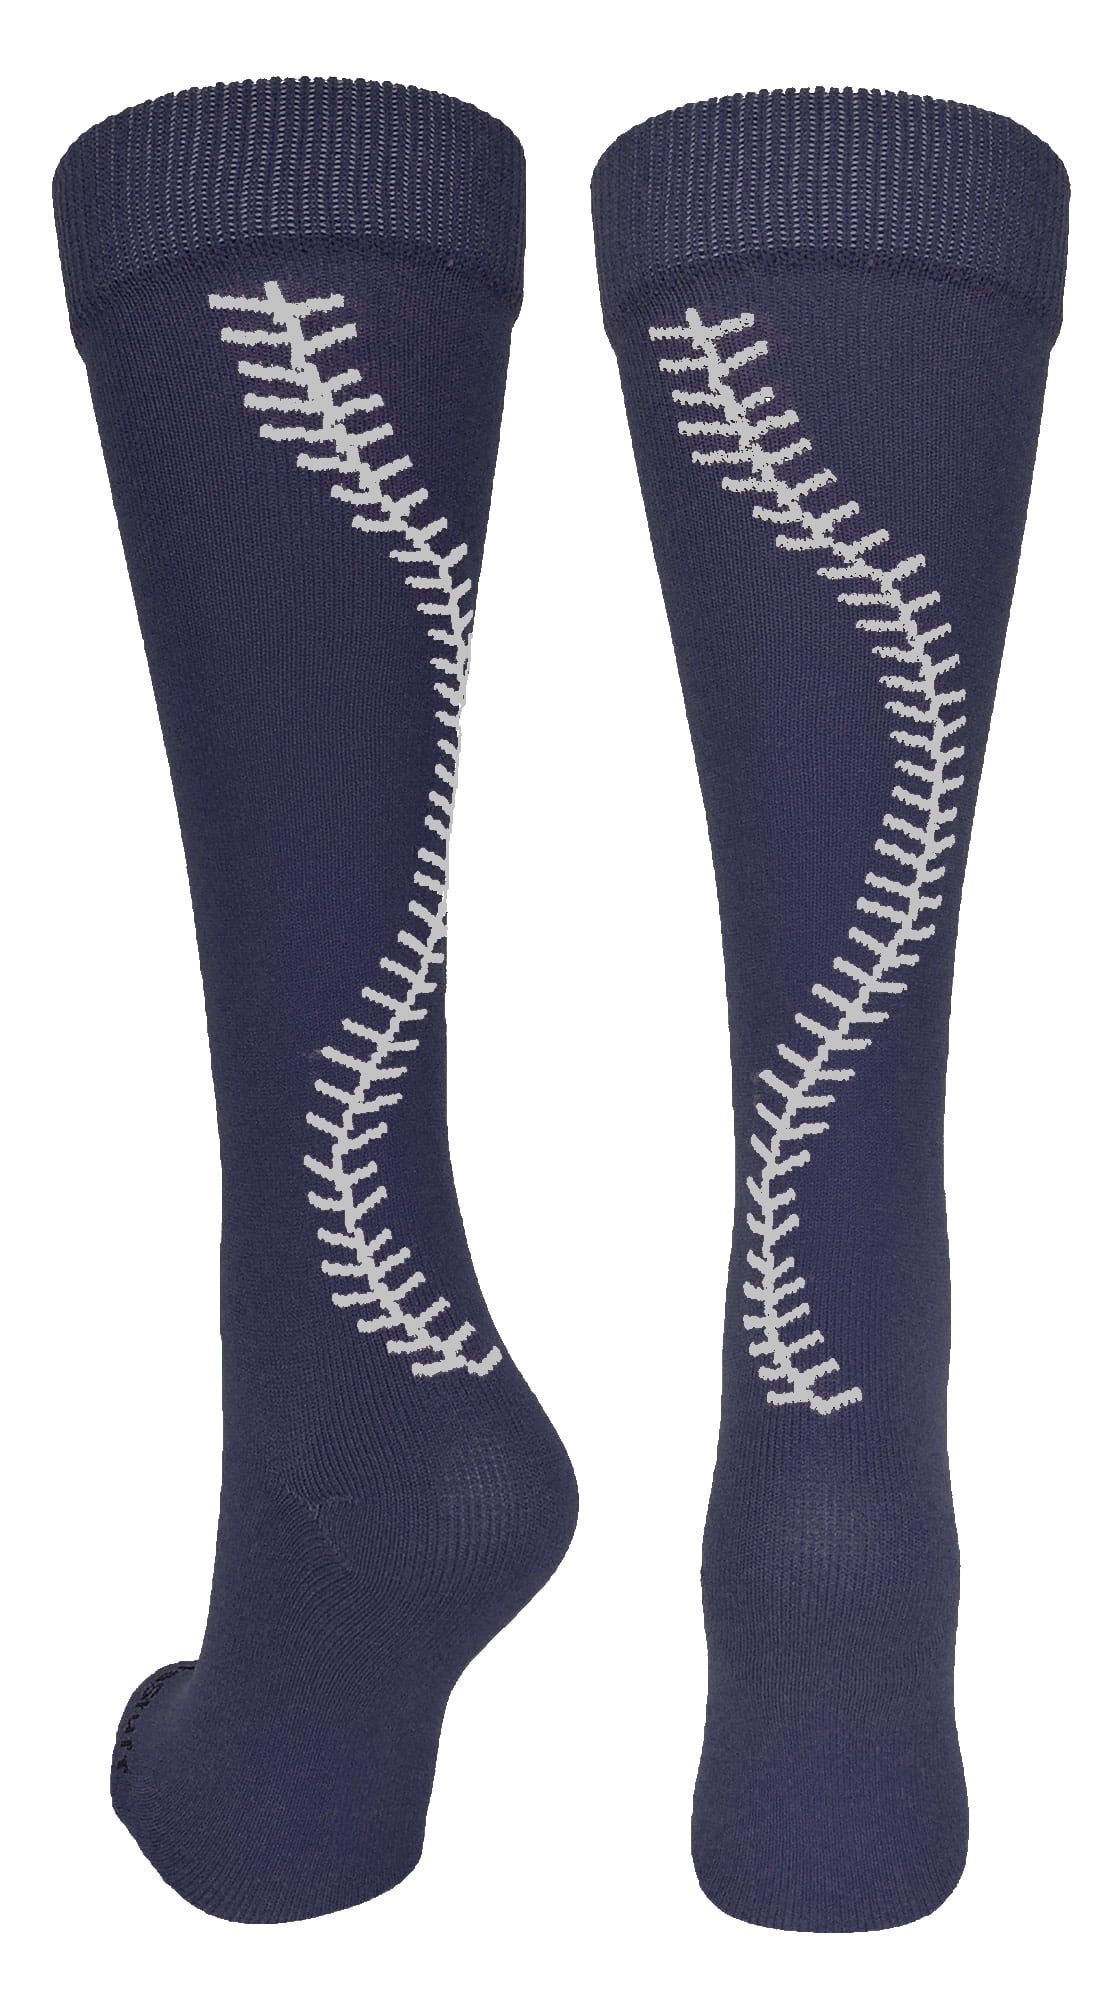 for Girls or Women Knee High Length MadSportsStuff Softball Socks with Stitches 